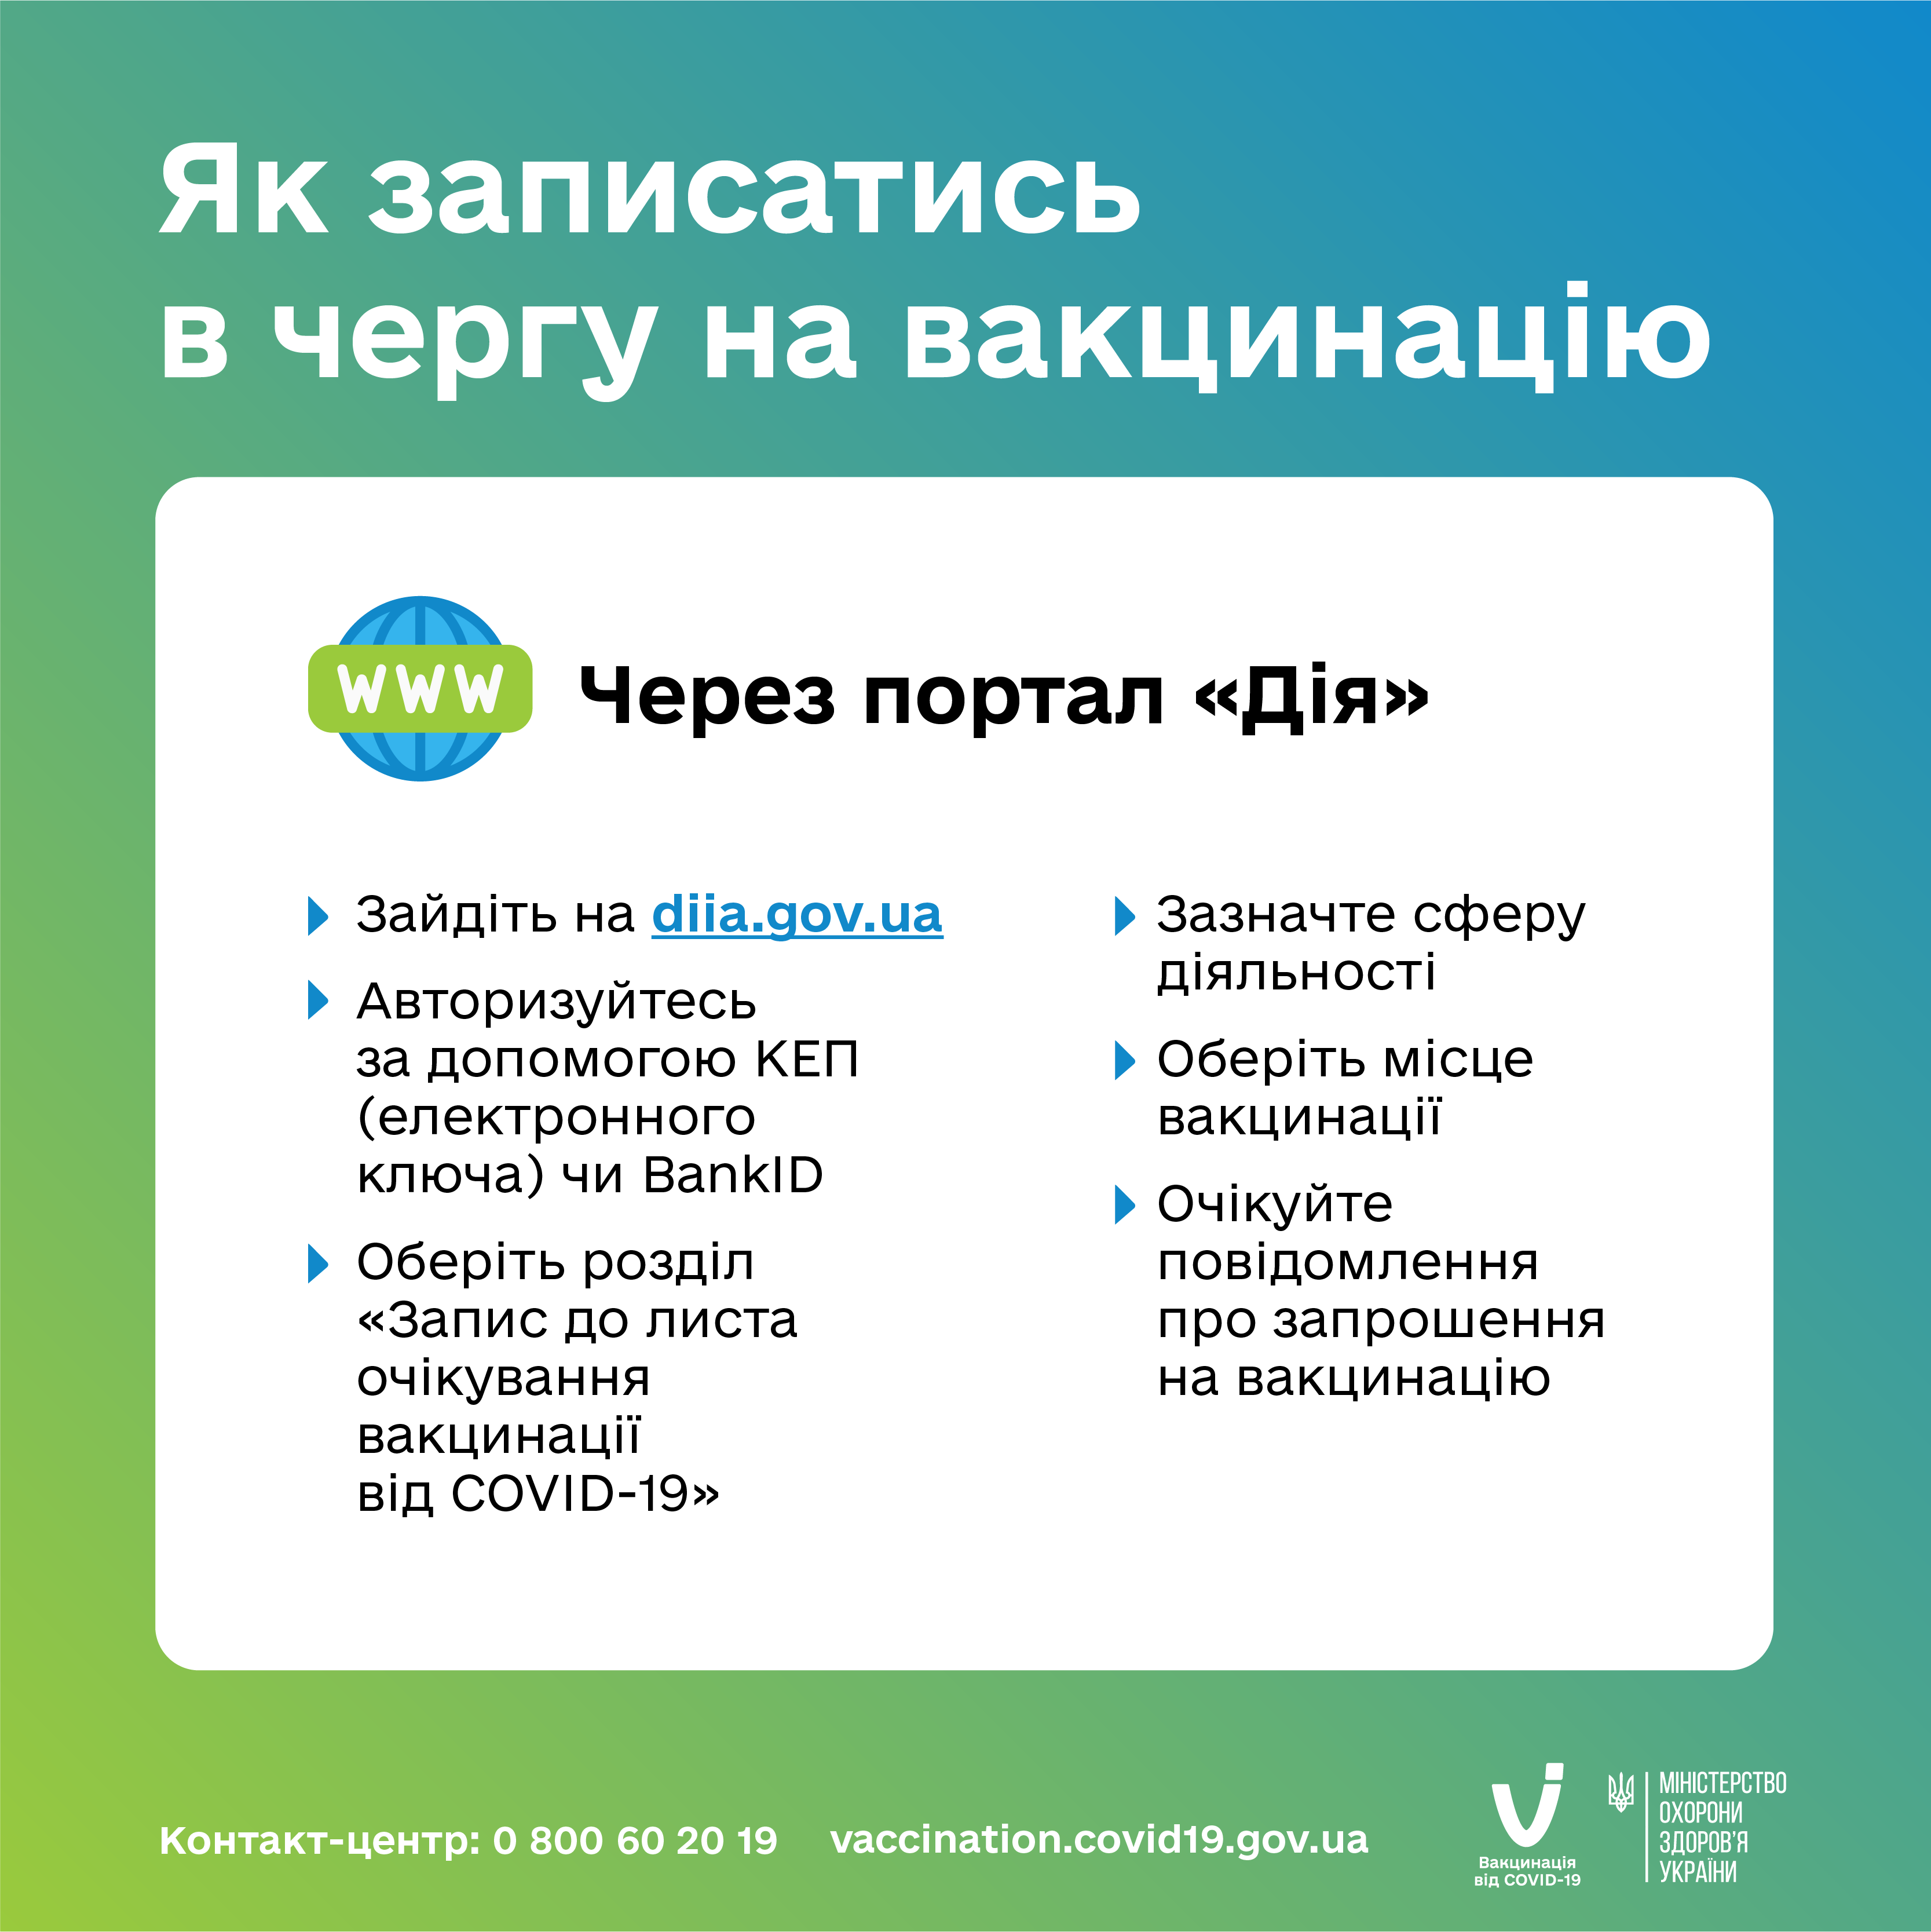 sign up for vaccination_DIIA portal